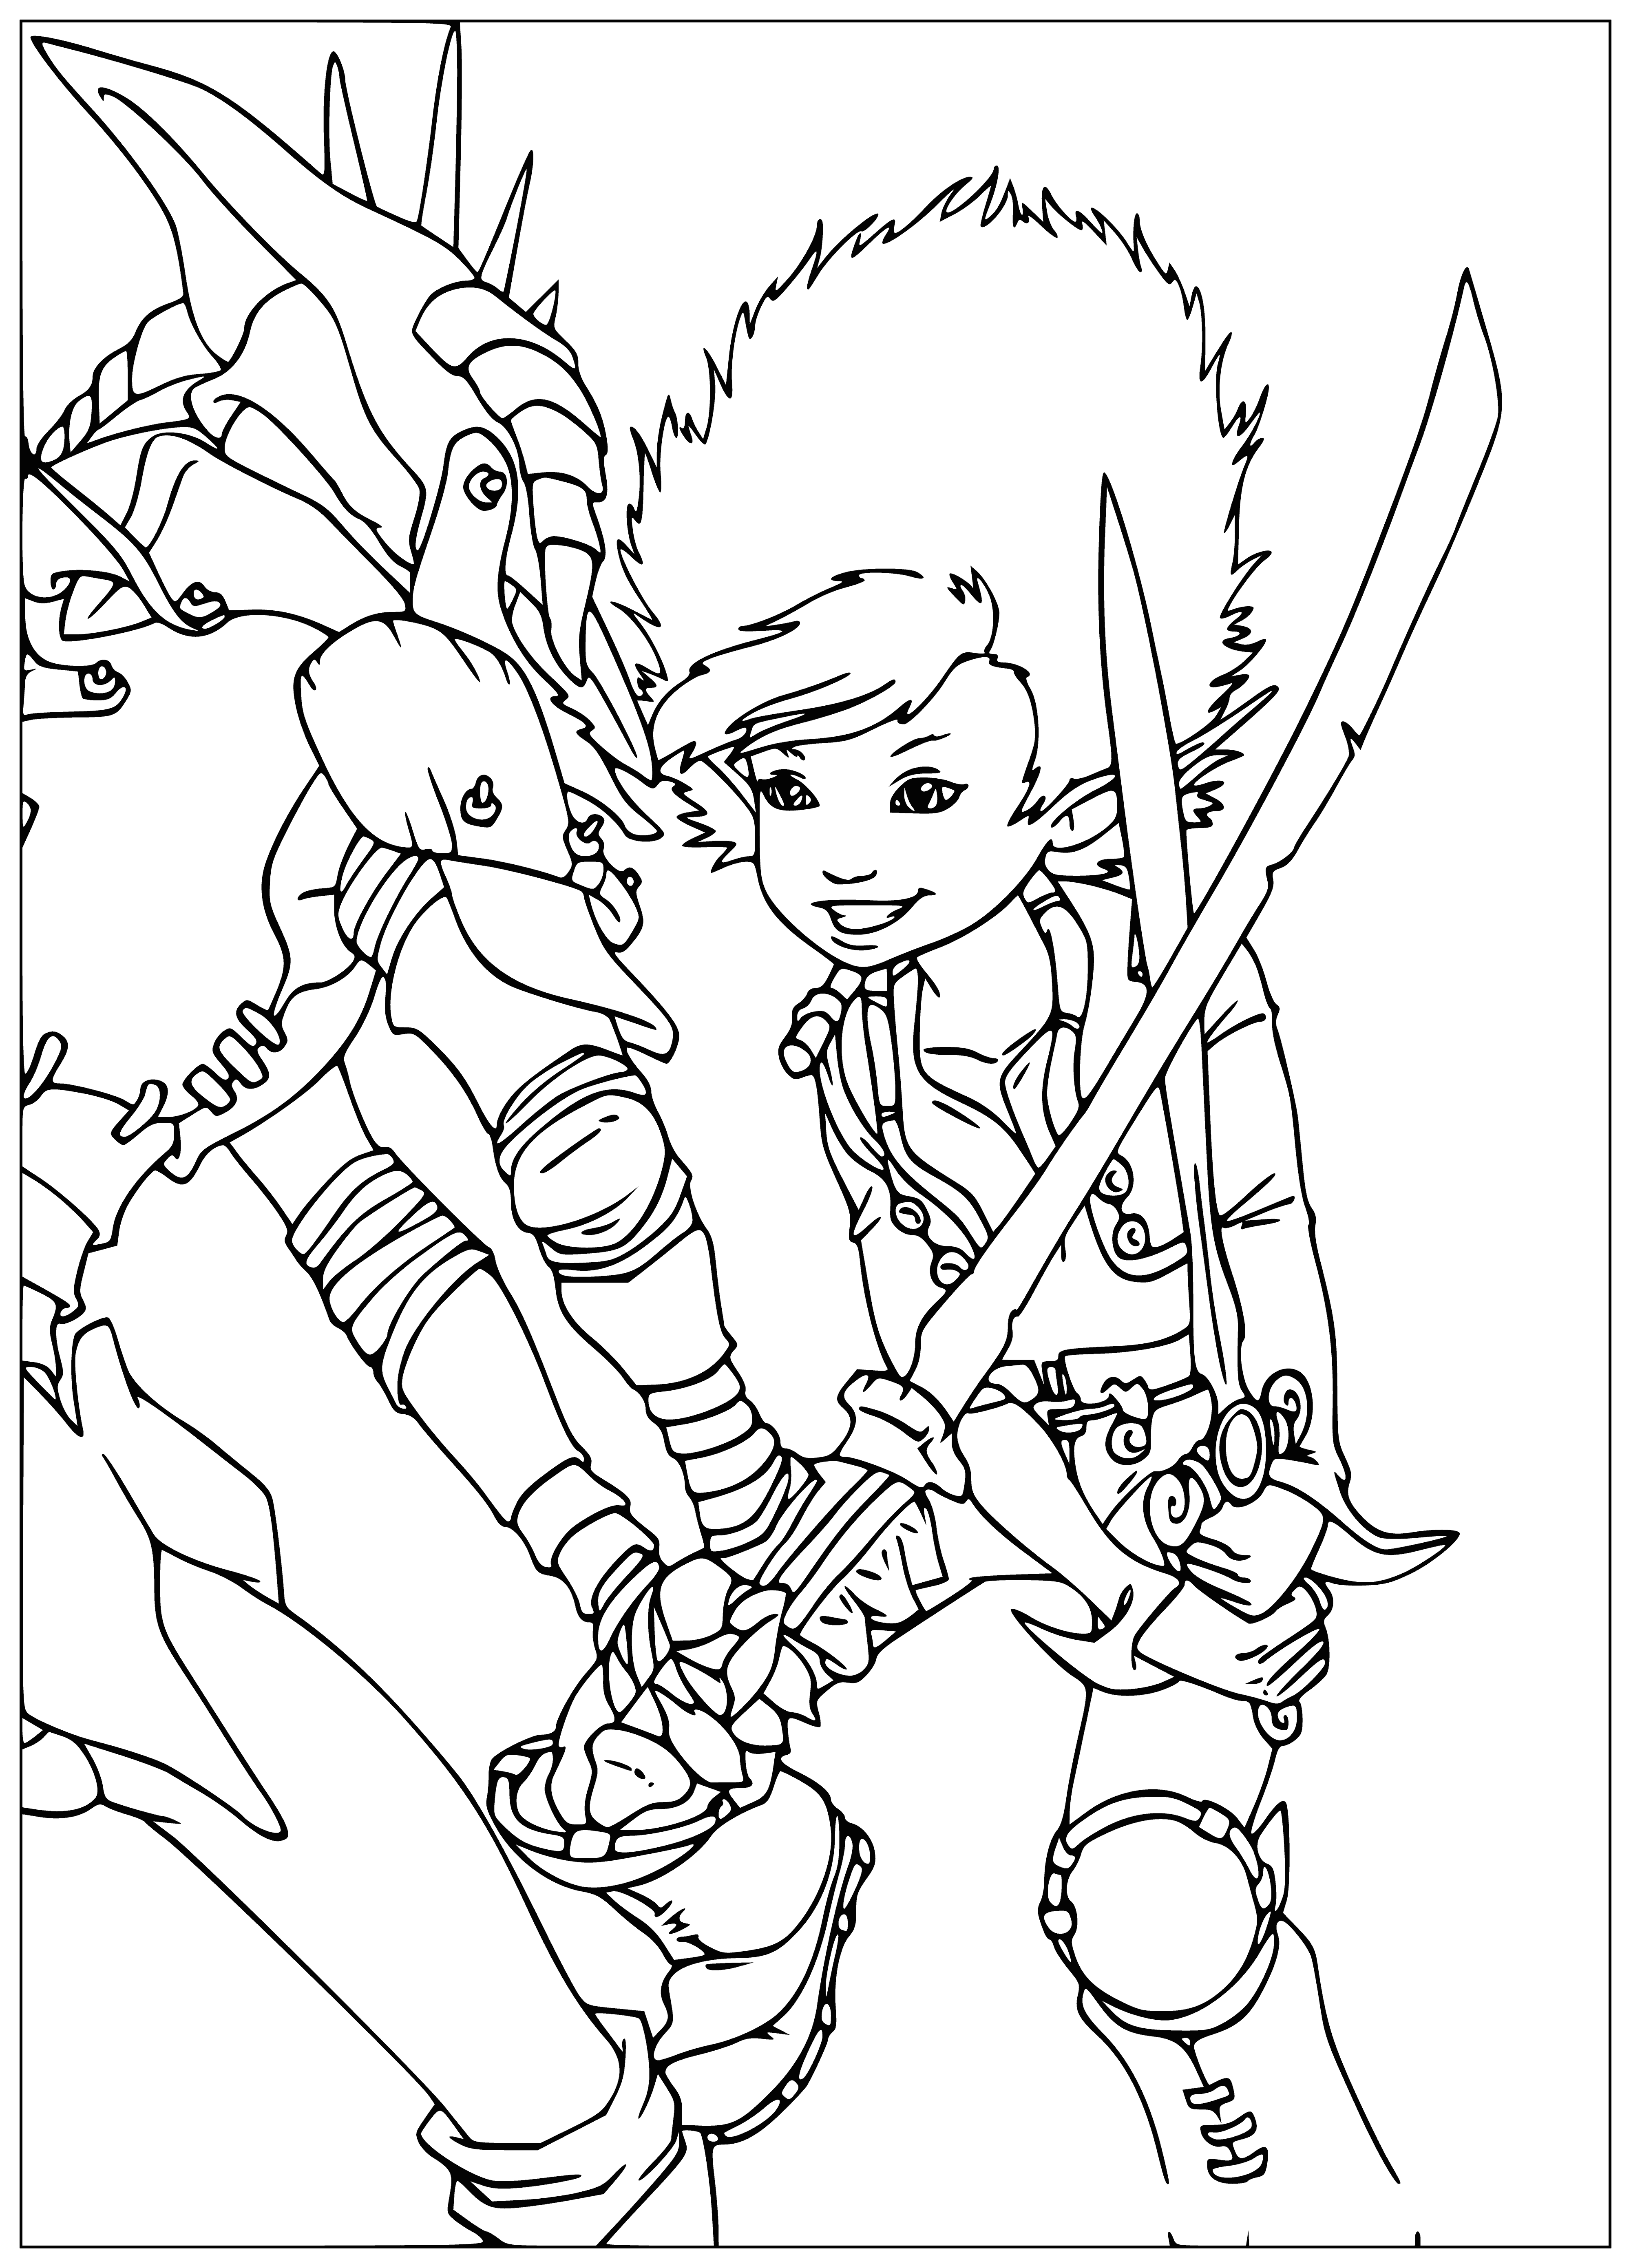 Arthur fights coloring page